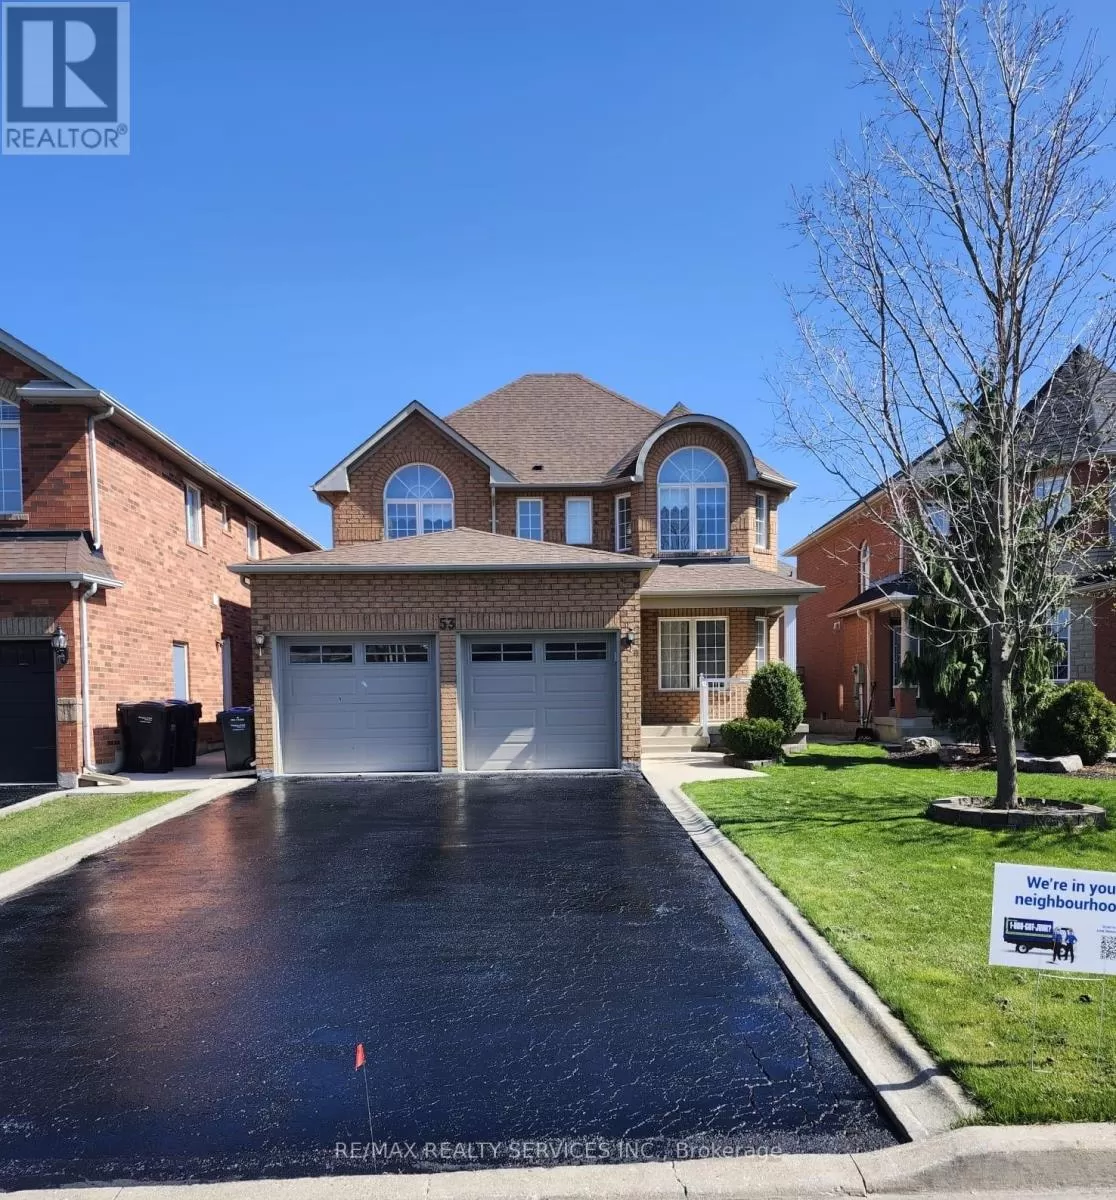 House for rent: 53 Baccarat Crescent, Brampton, Ontario L7A 1K8